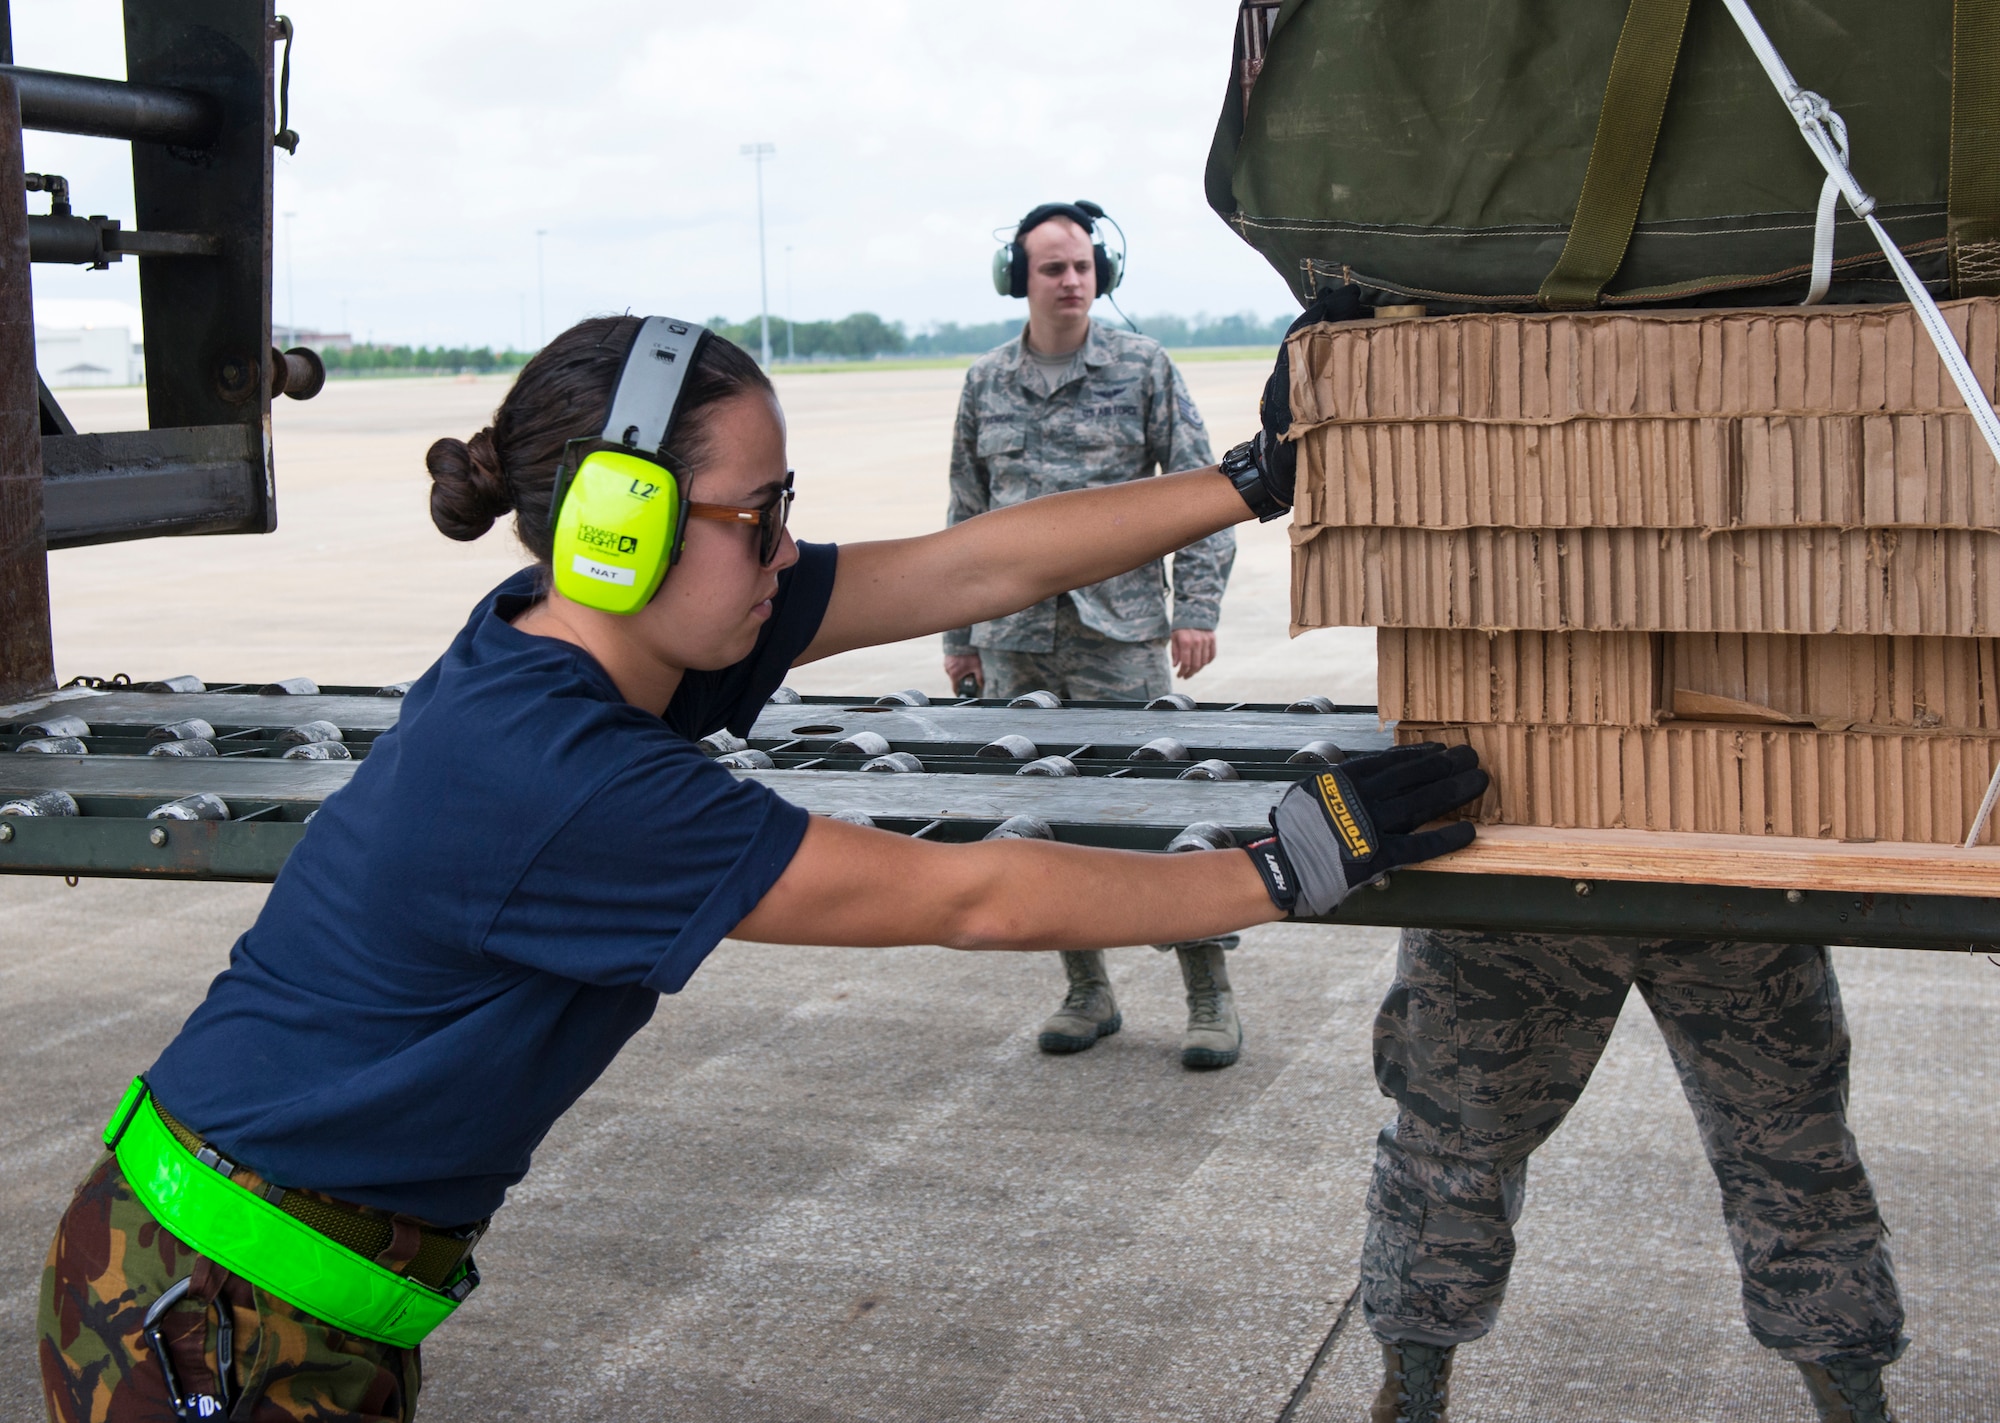 Leading Aircraftsmen Natalie Ferrell, Royal New Zealand air force air movements, loads cargo onto a C-130 Hercules during a Joint Readiness Training exercise at Alexandria International Airport, La. April 20, 2016. JRTC is a multinational exercise focused on pre-deployment and airdrop capabilities. (U.S. Air Force photo by Senior Airman Joshua King)